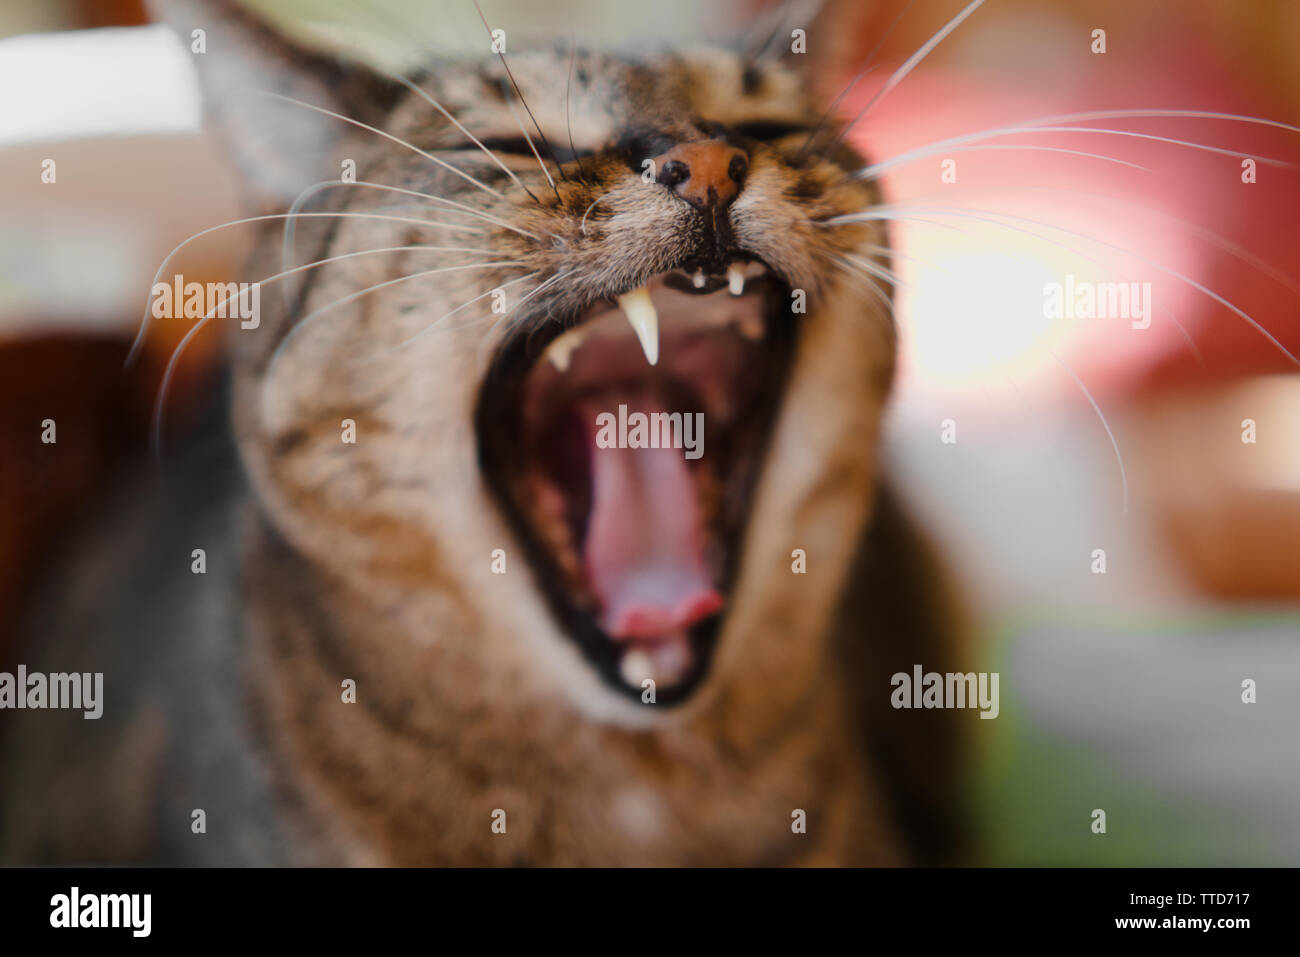 Old tabby cat yawning, showing tongue and teeth, on blurred background Stock Photo